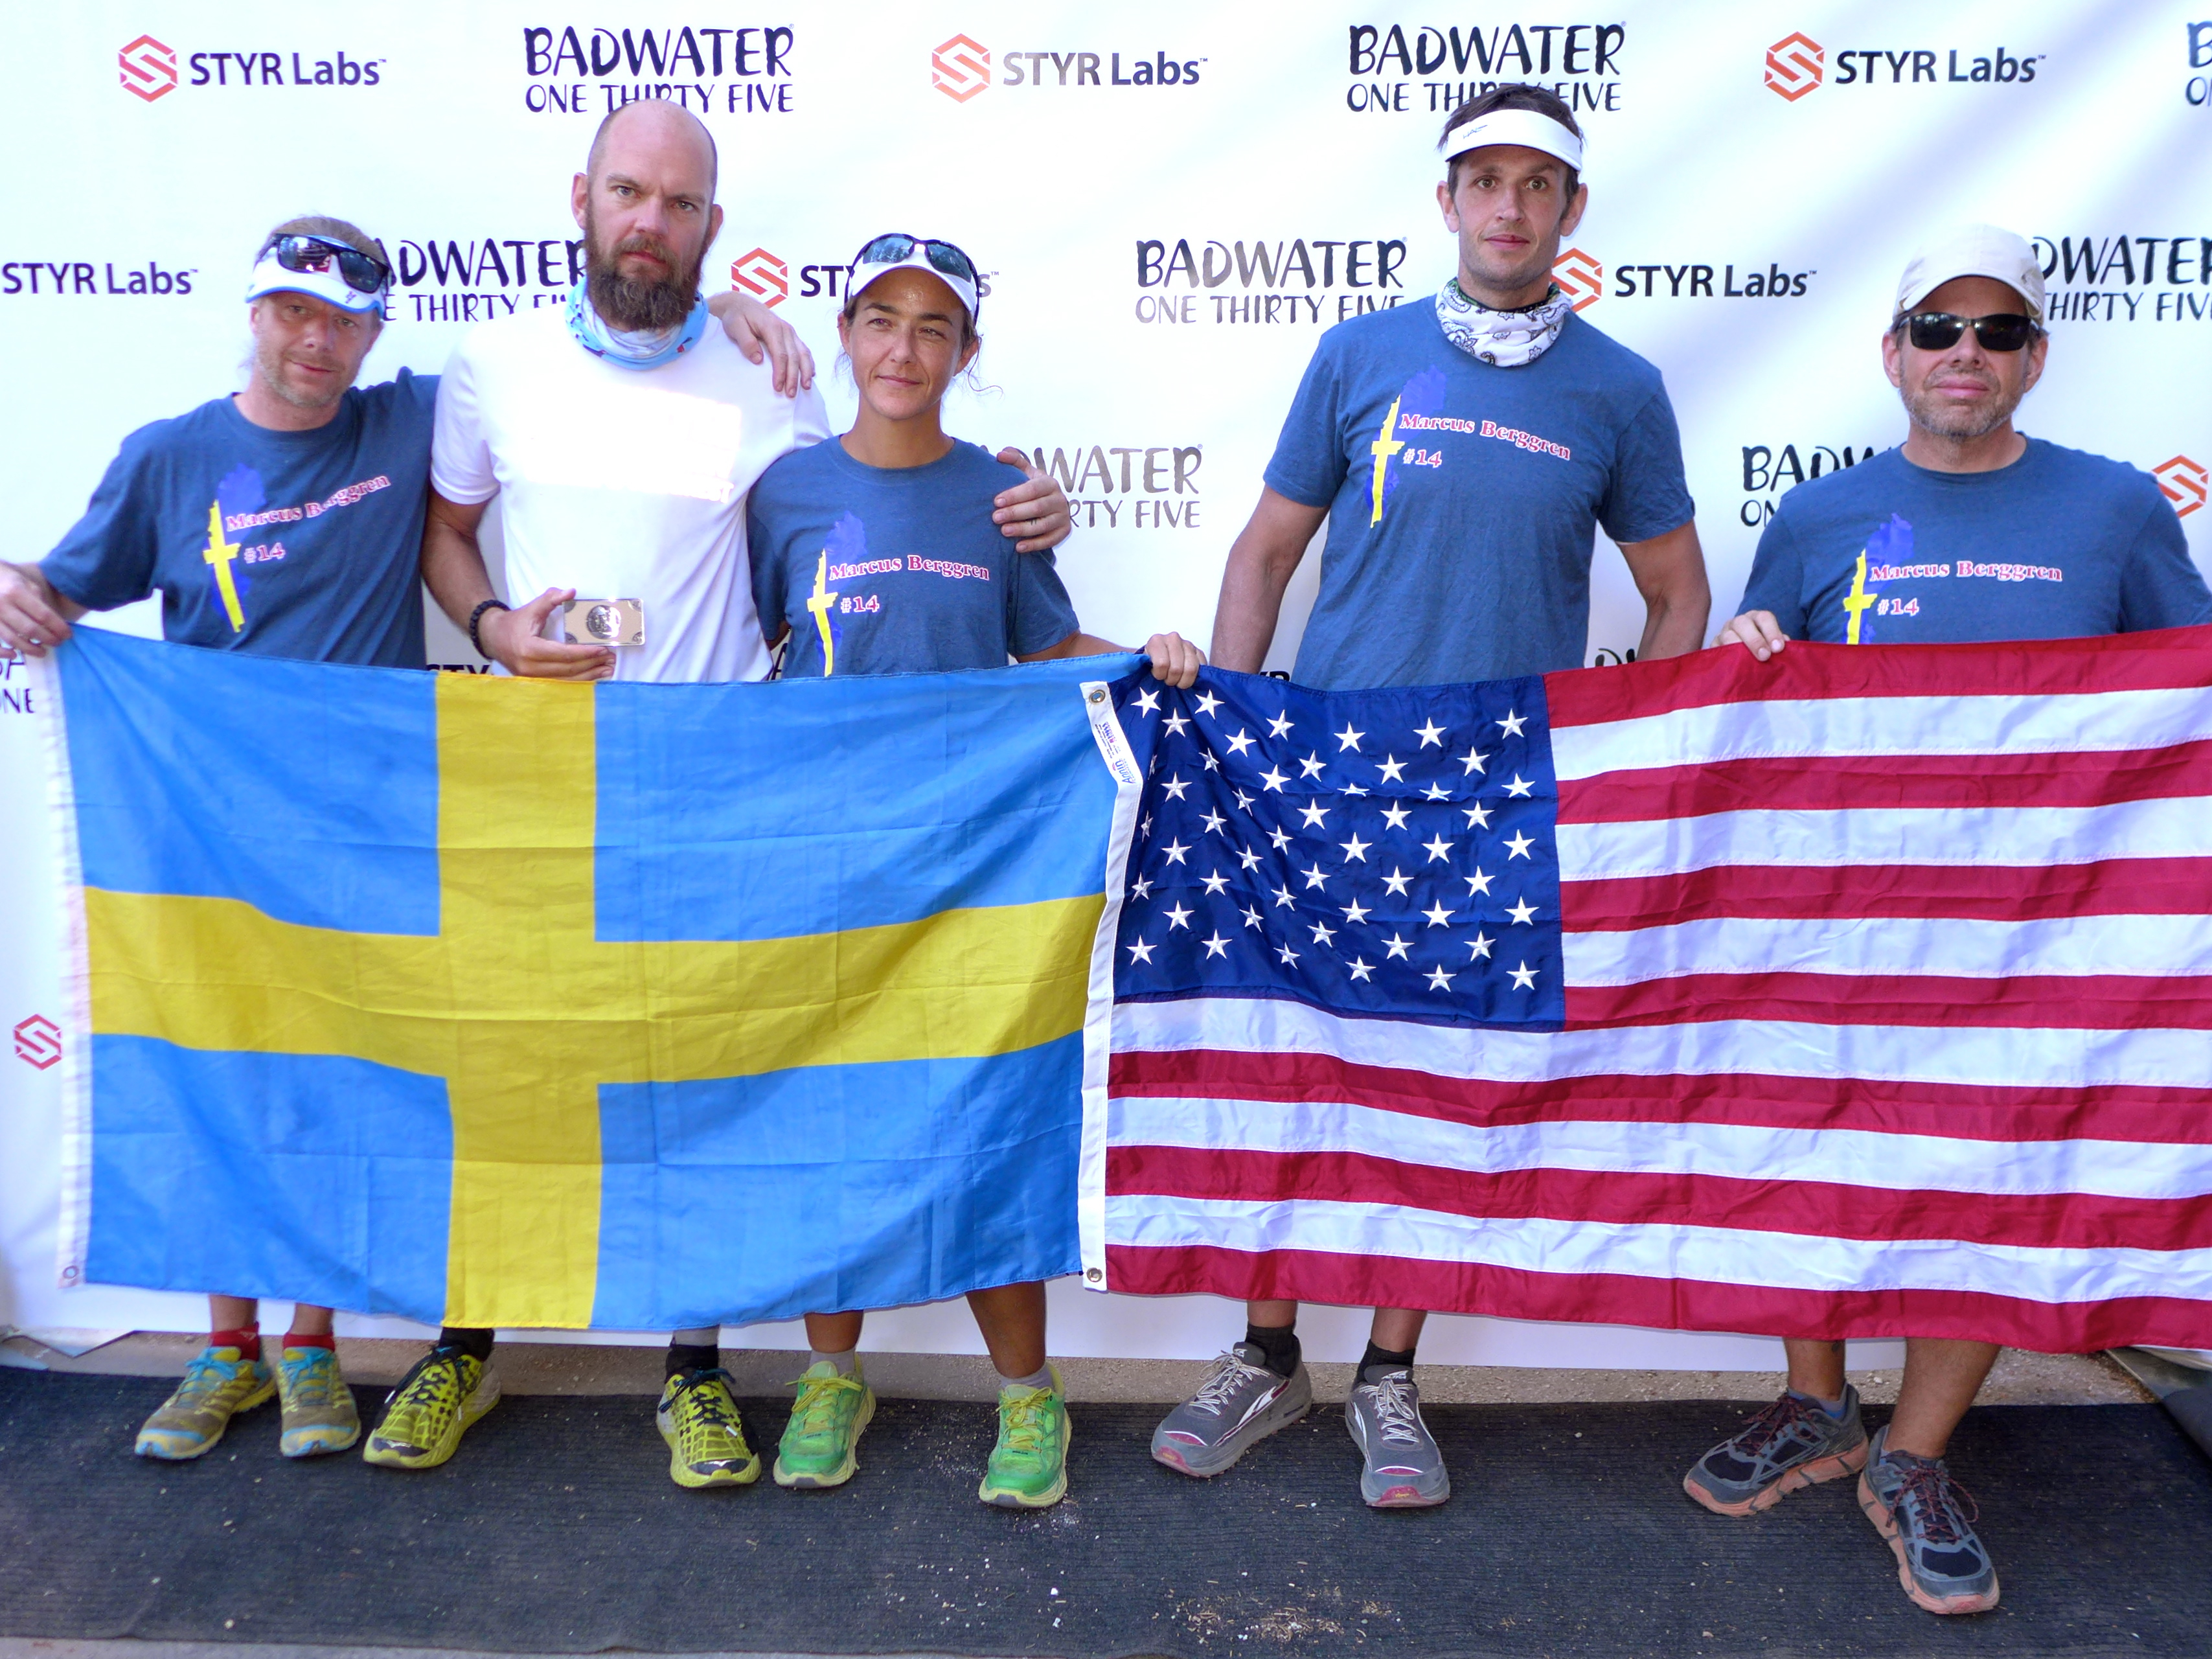 Finish photo with the Swedish and American flags